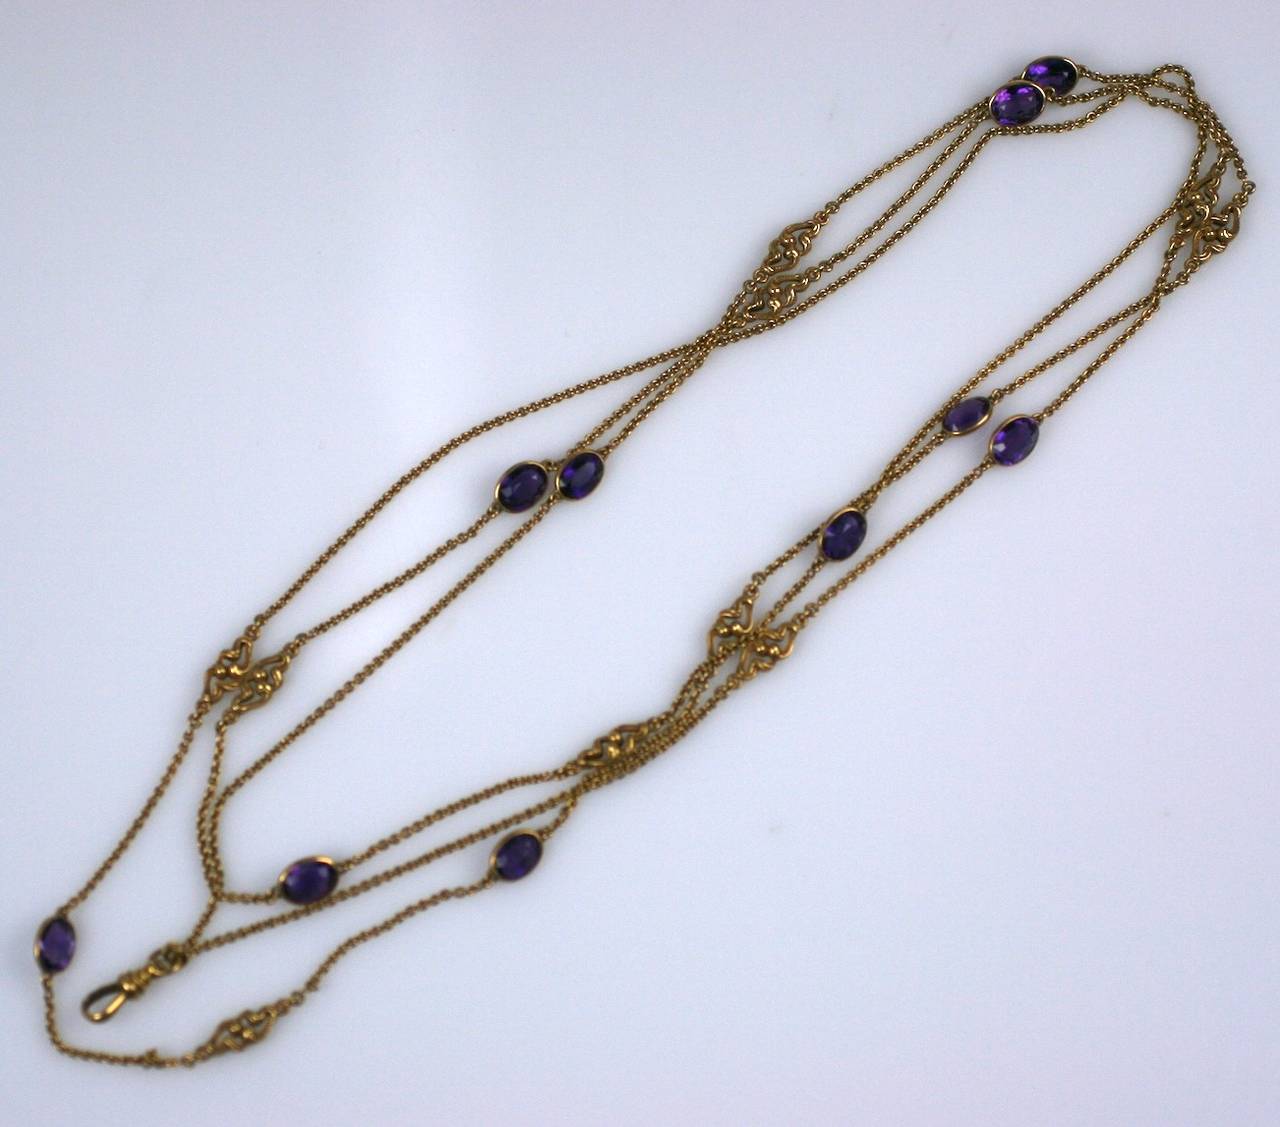 Art Nouveau Amethyst Long Chain in 18K gold with original bloom. Bezel set deep amethysts of approximately 1.5 carats each are interdispersed with Art Nouveau whiplash stations alternating throughout the chain. 

60